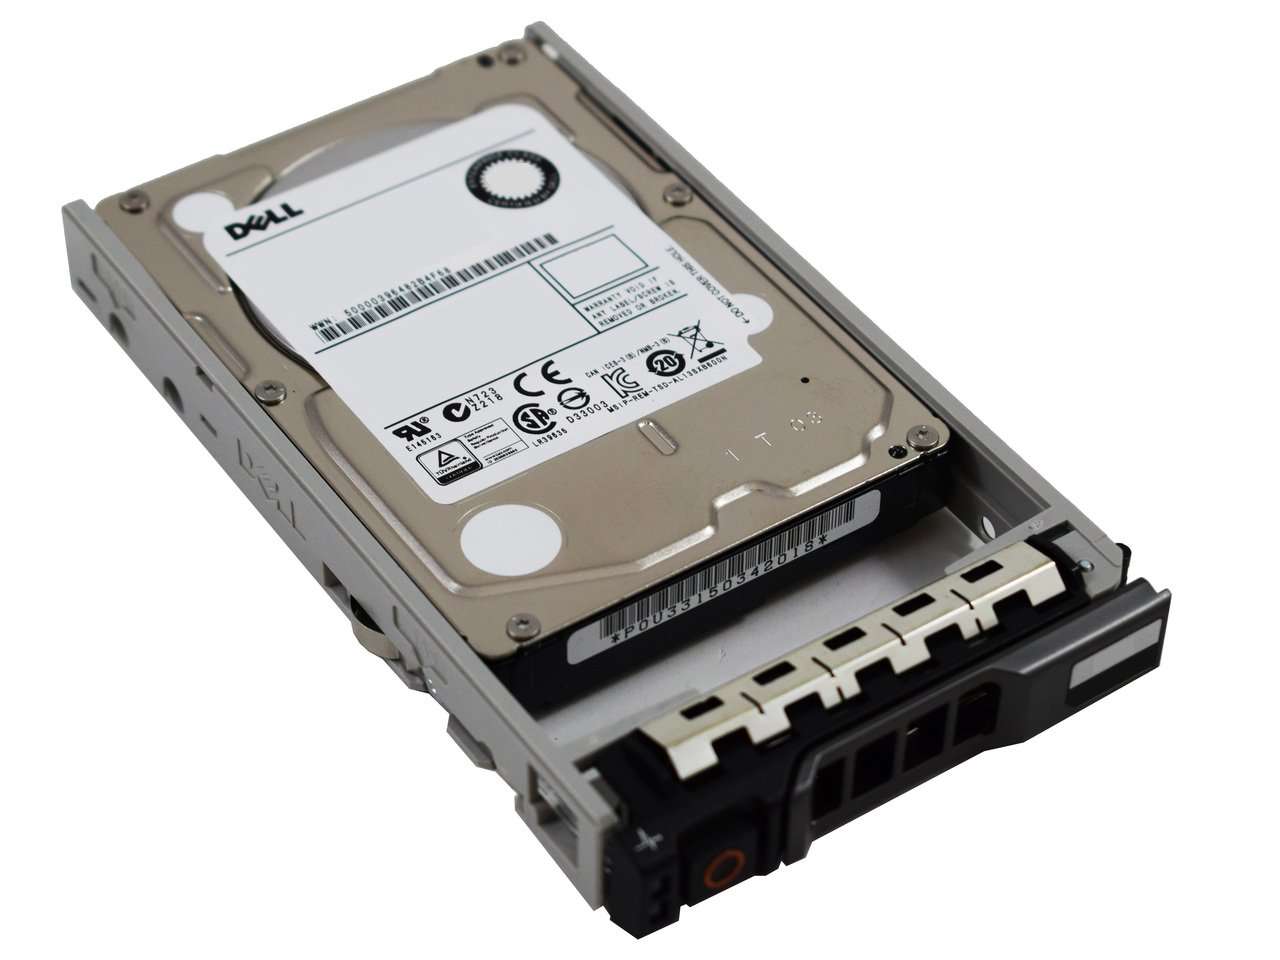 Dell G13 0CCWW3 600GB 10K RPM SAS 6Gb/s 512n 2.5" Manufacturer Recertified HDD